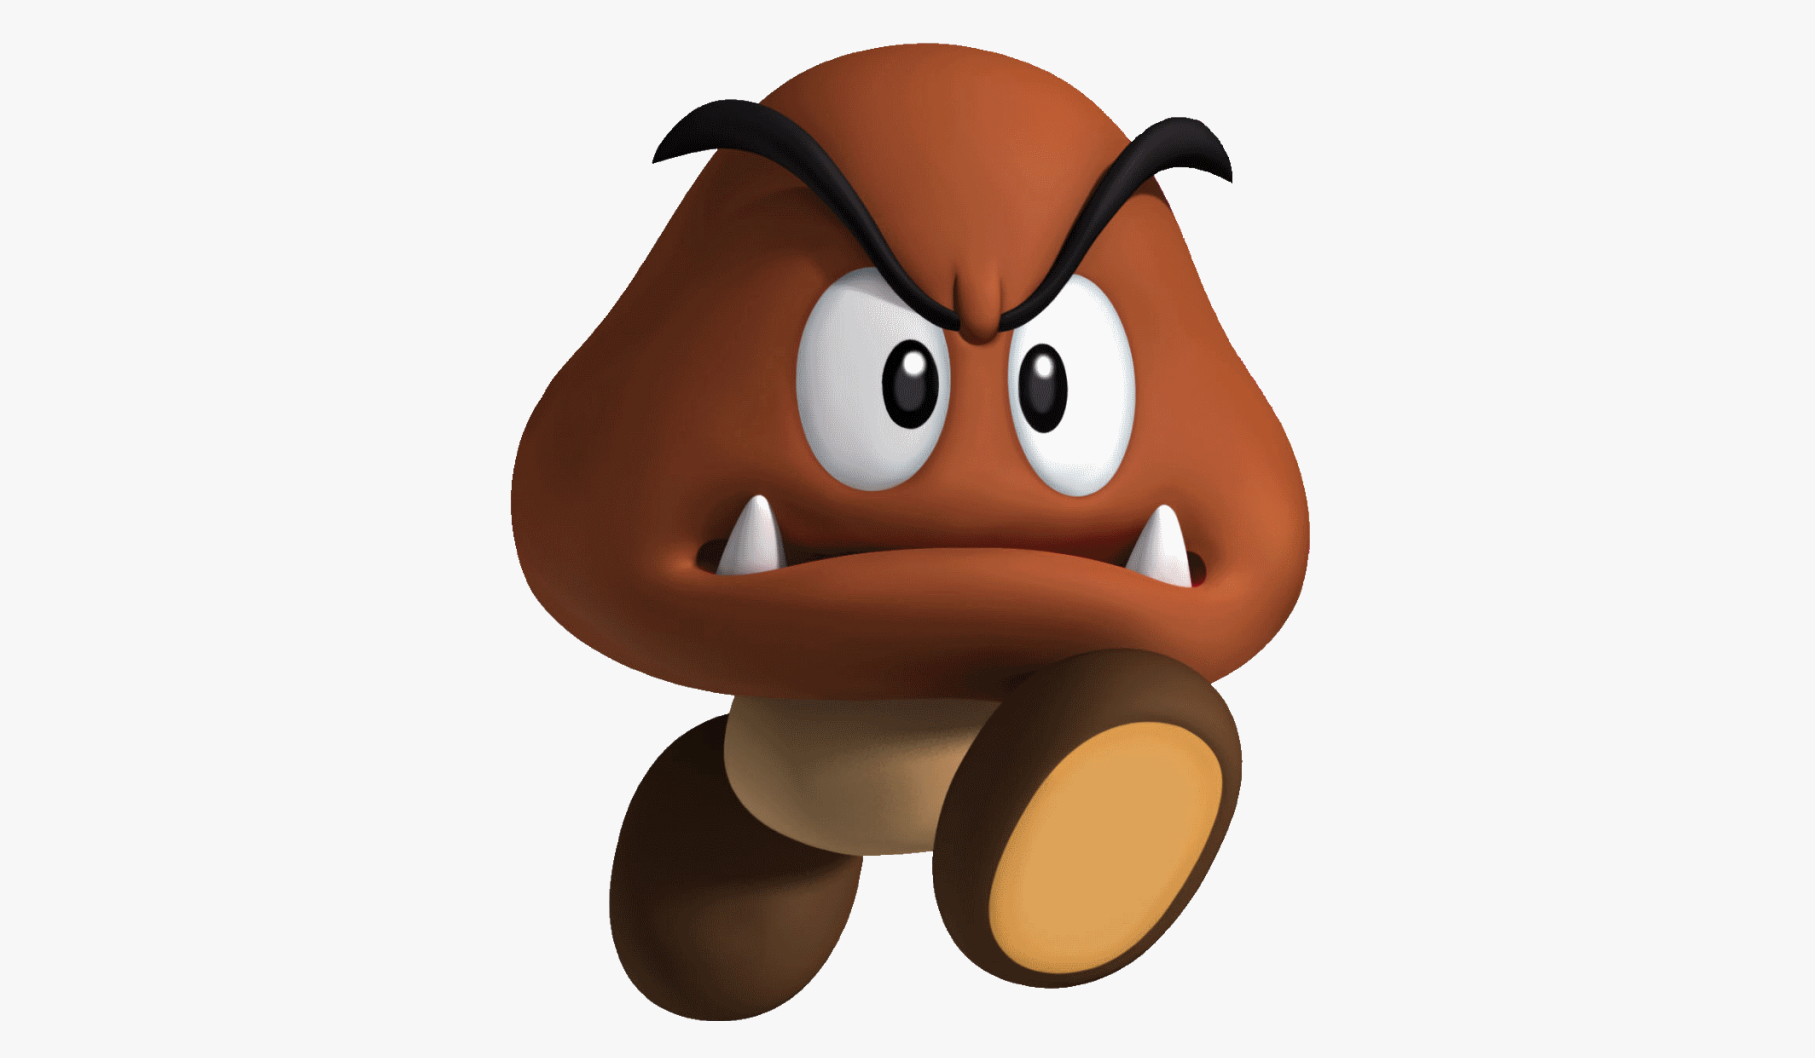 This Hot Cosplayer Dressed Up As A Goomba And I Discovered Some New Things ...